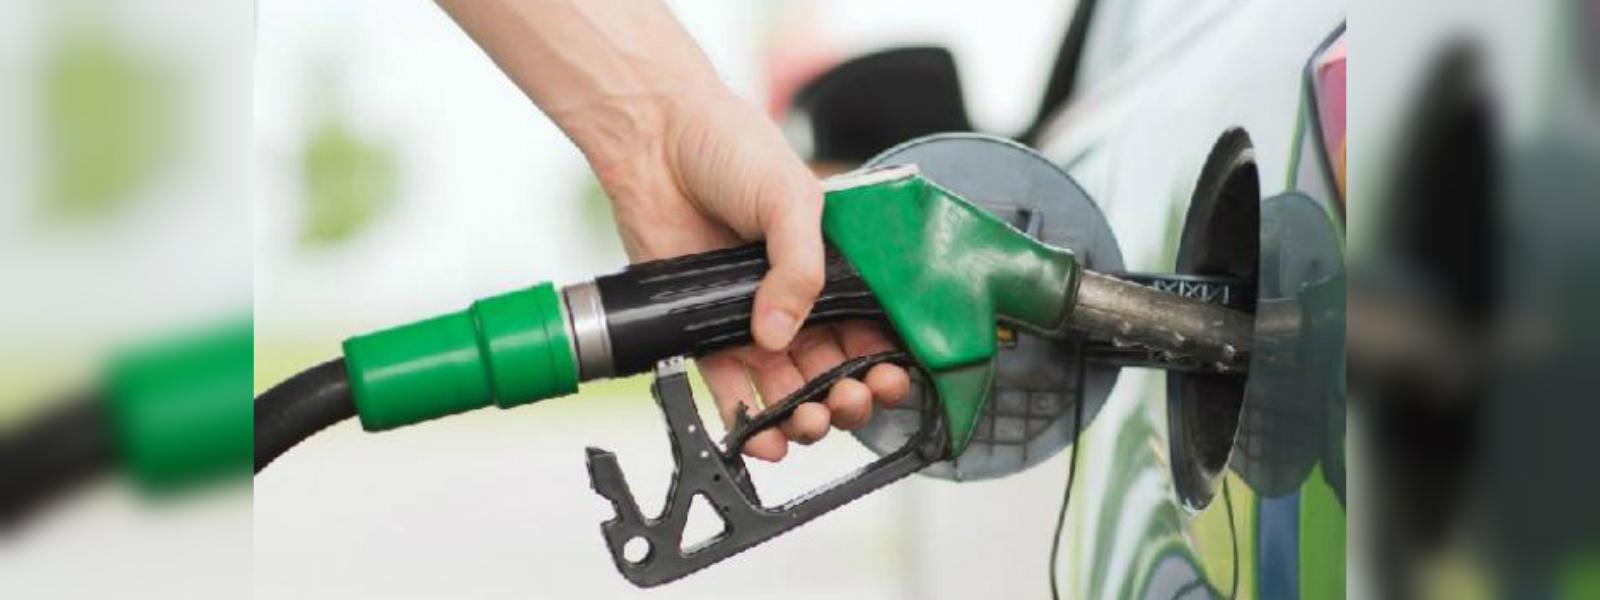 Only 92 Octane petrol increased by Rs 3 to Rs 138 